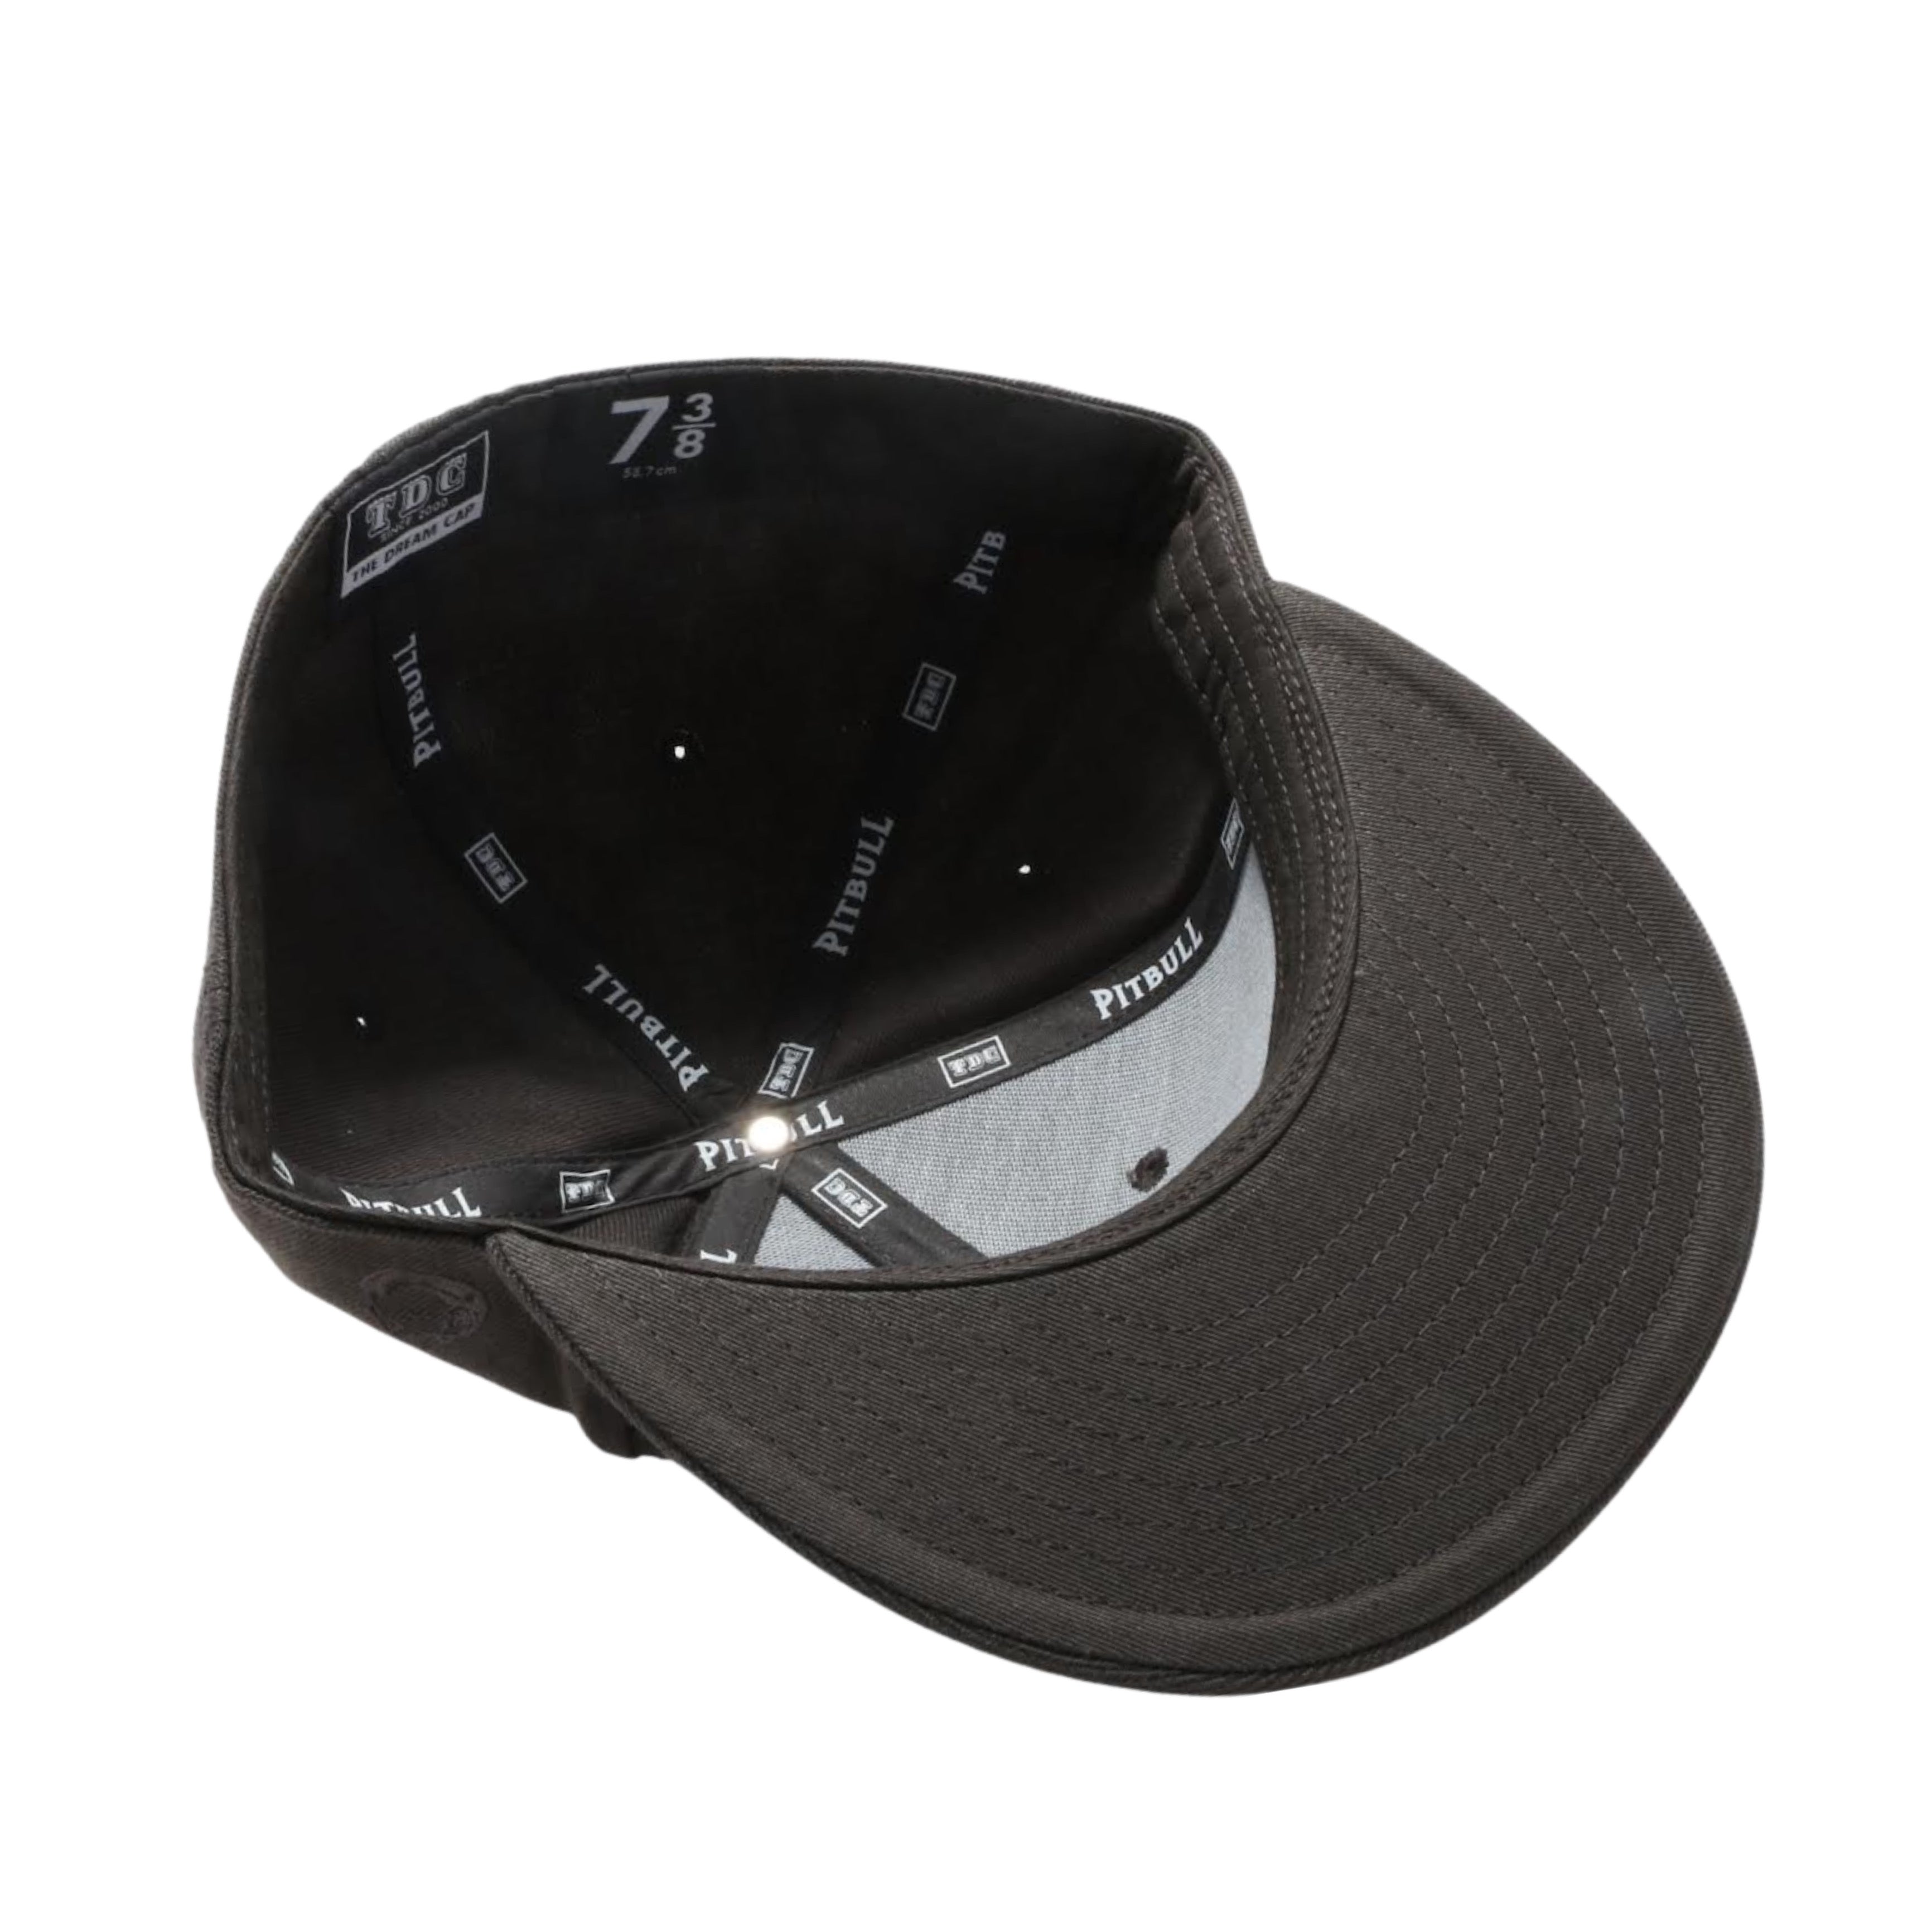 Pit Bull Plain Fitted Hat